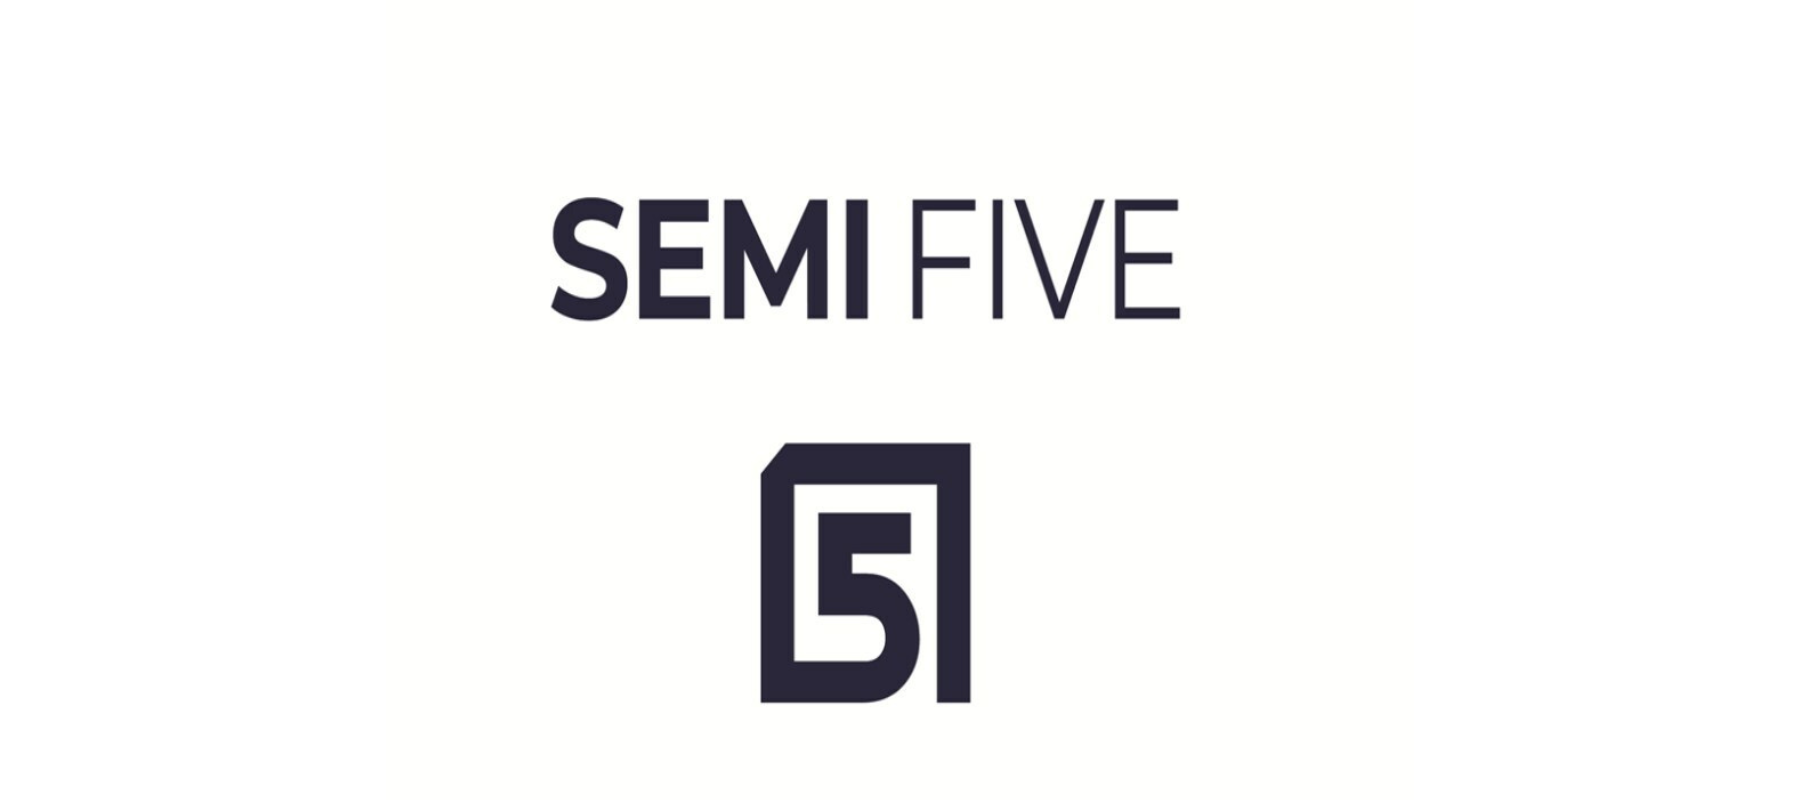 SEMIFIVE collaborates with South Korean startup MetisX to develop CXL-based memory accelerator chip